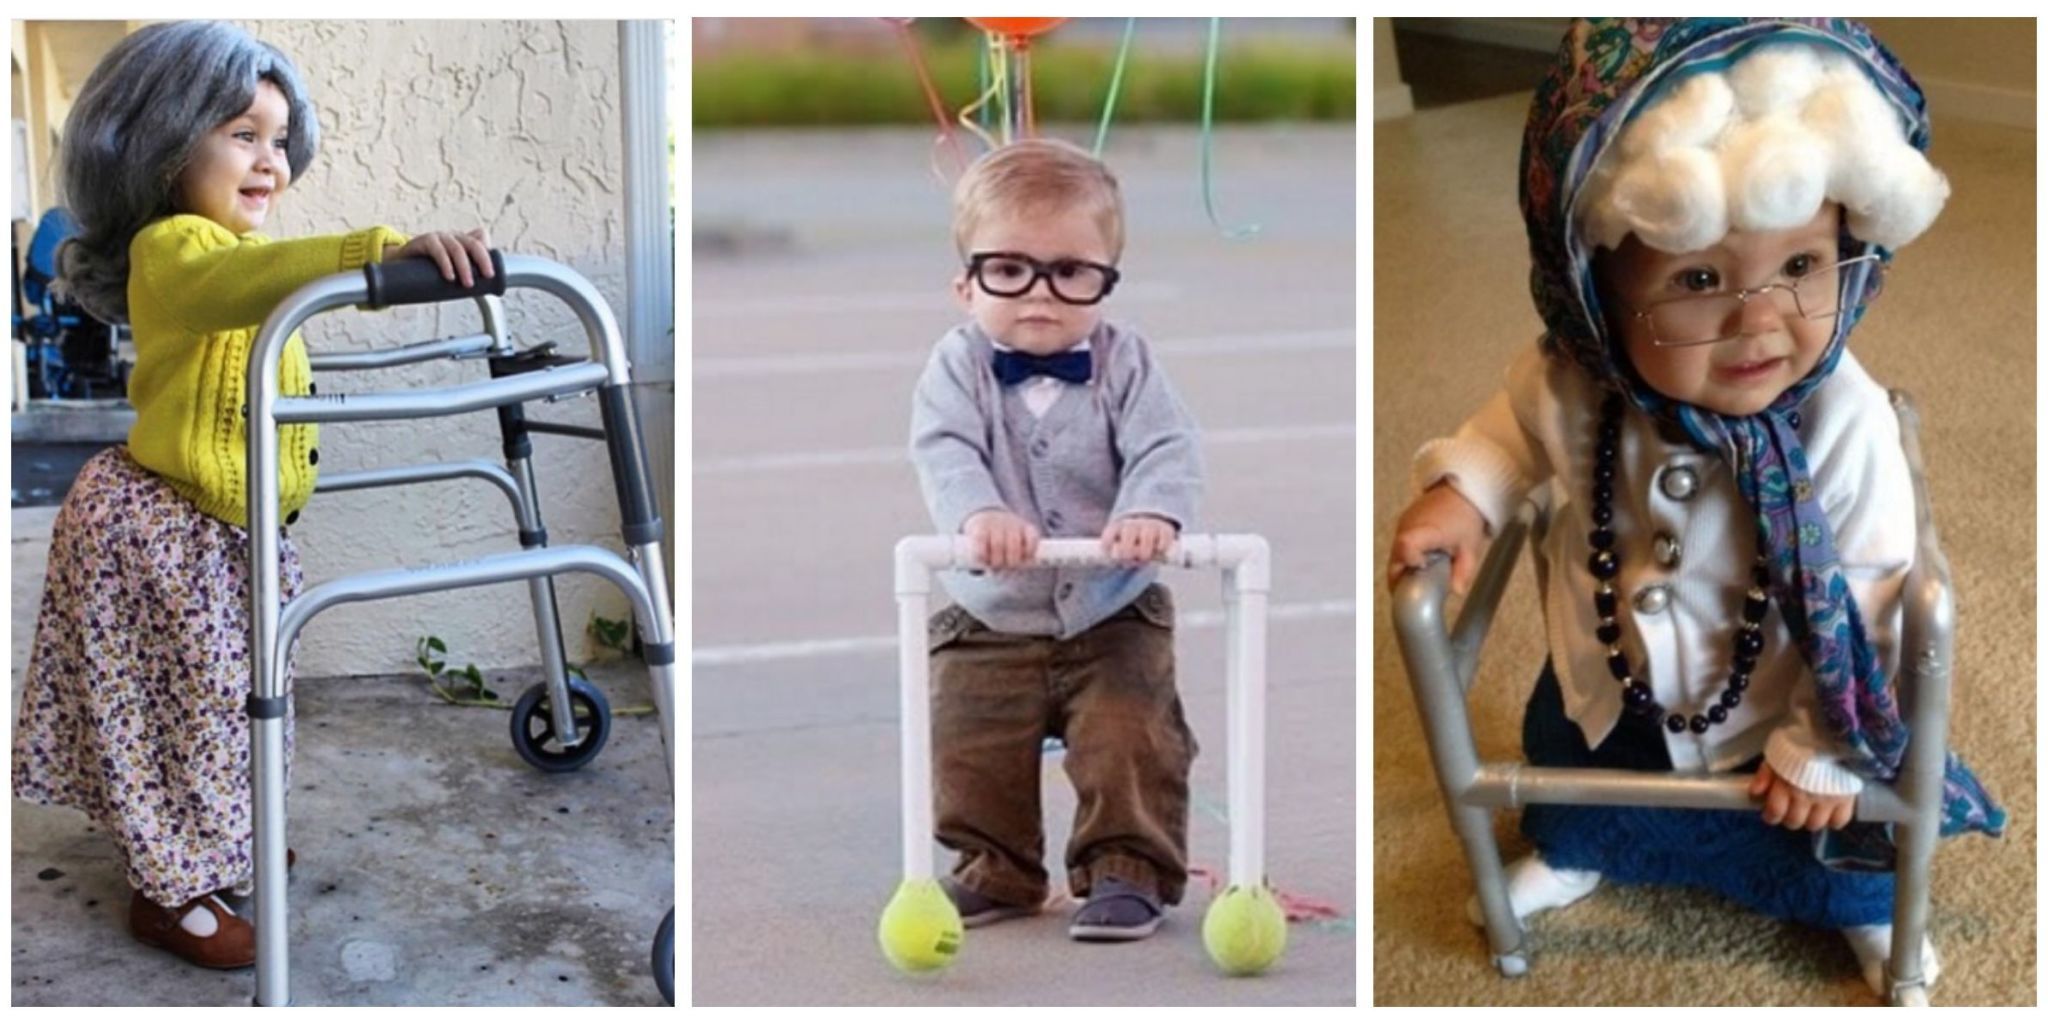 13 Photos of Babies Dressed Up as Old People That Are Almost Too Cute to Handle